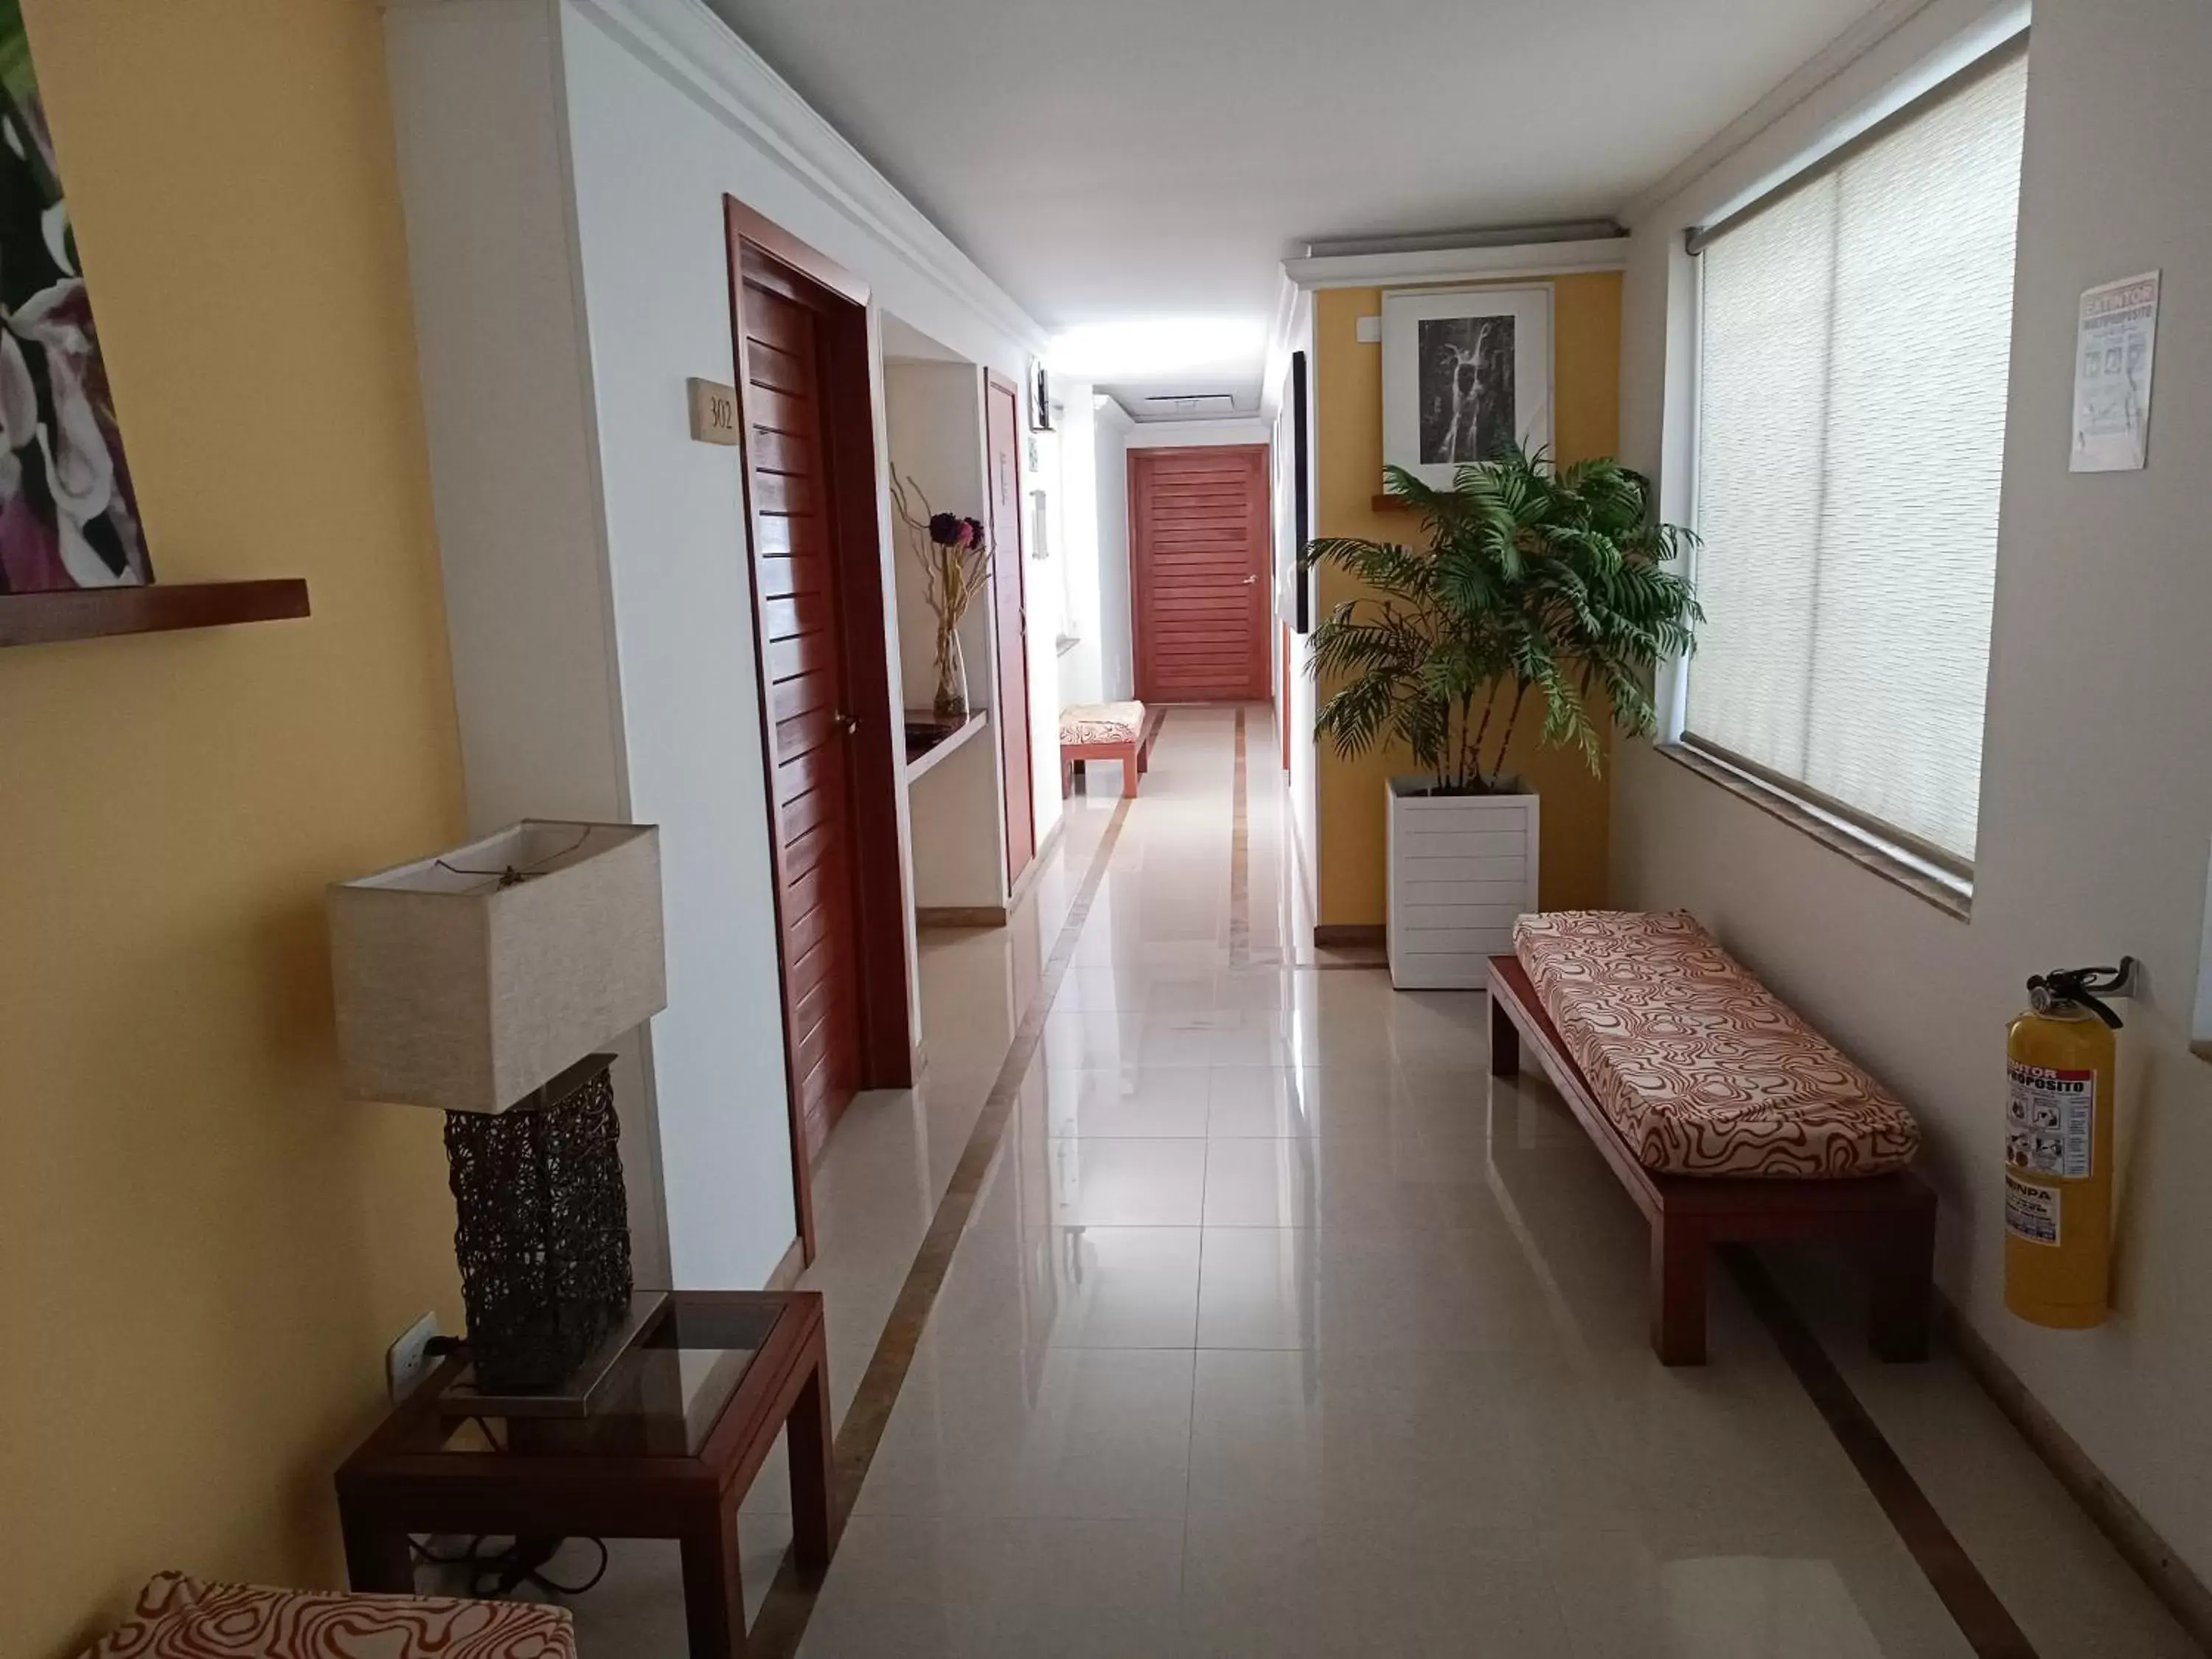 Area and facilities in Hotel Boutique Confort Suites